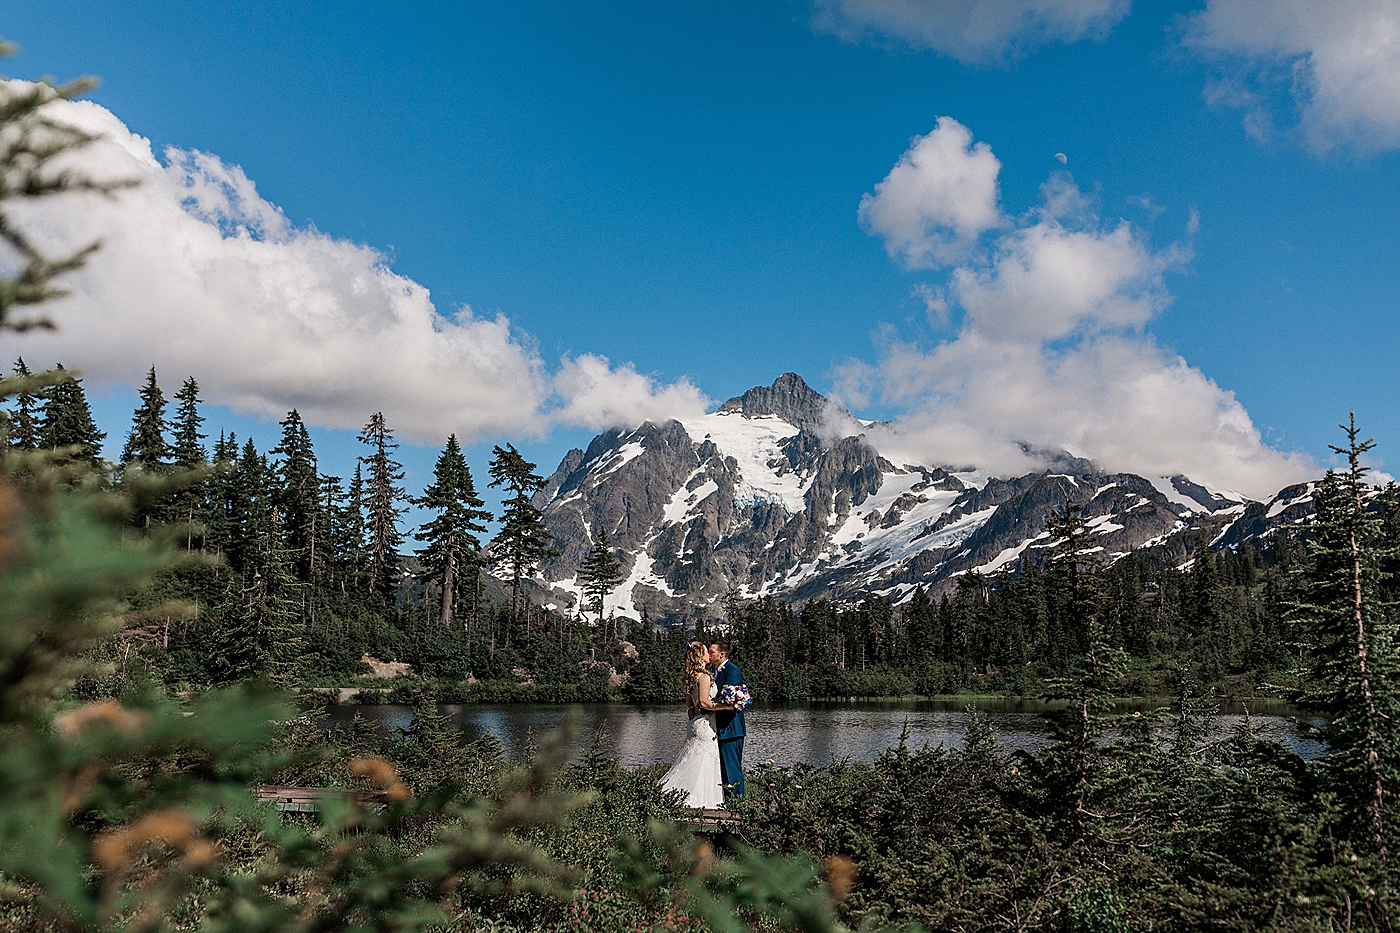 Summer elopement in the North Cascades. Photo by Megan Montalvo Photography.